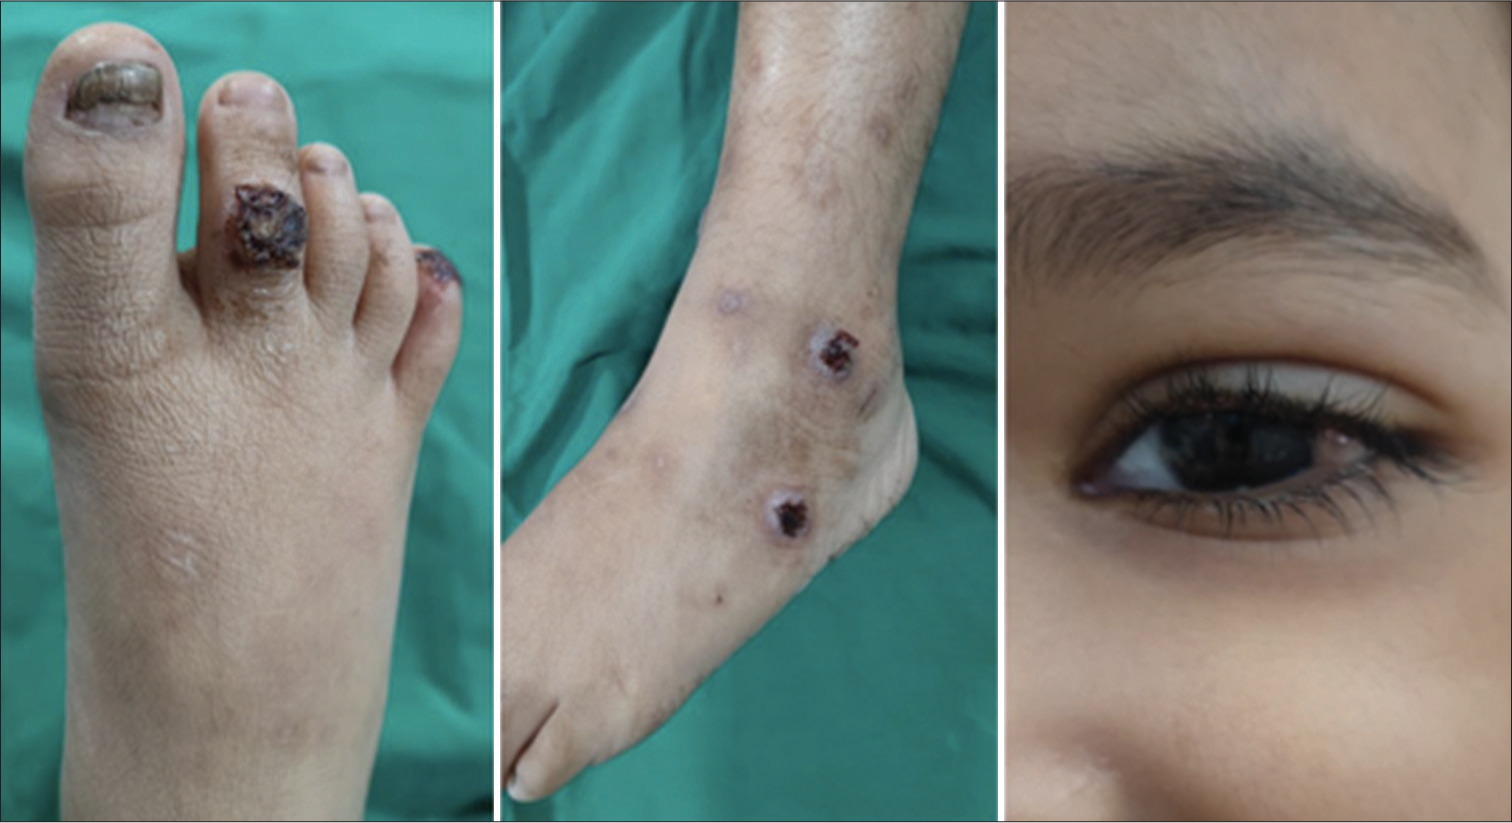 Skin and ocular lesions in our patient with Shabbir syndrome.